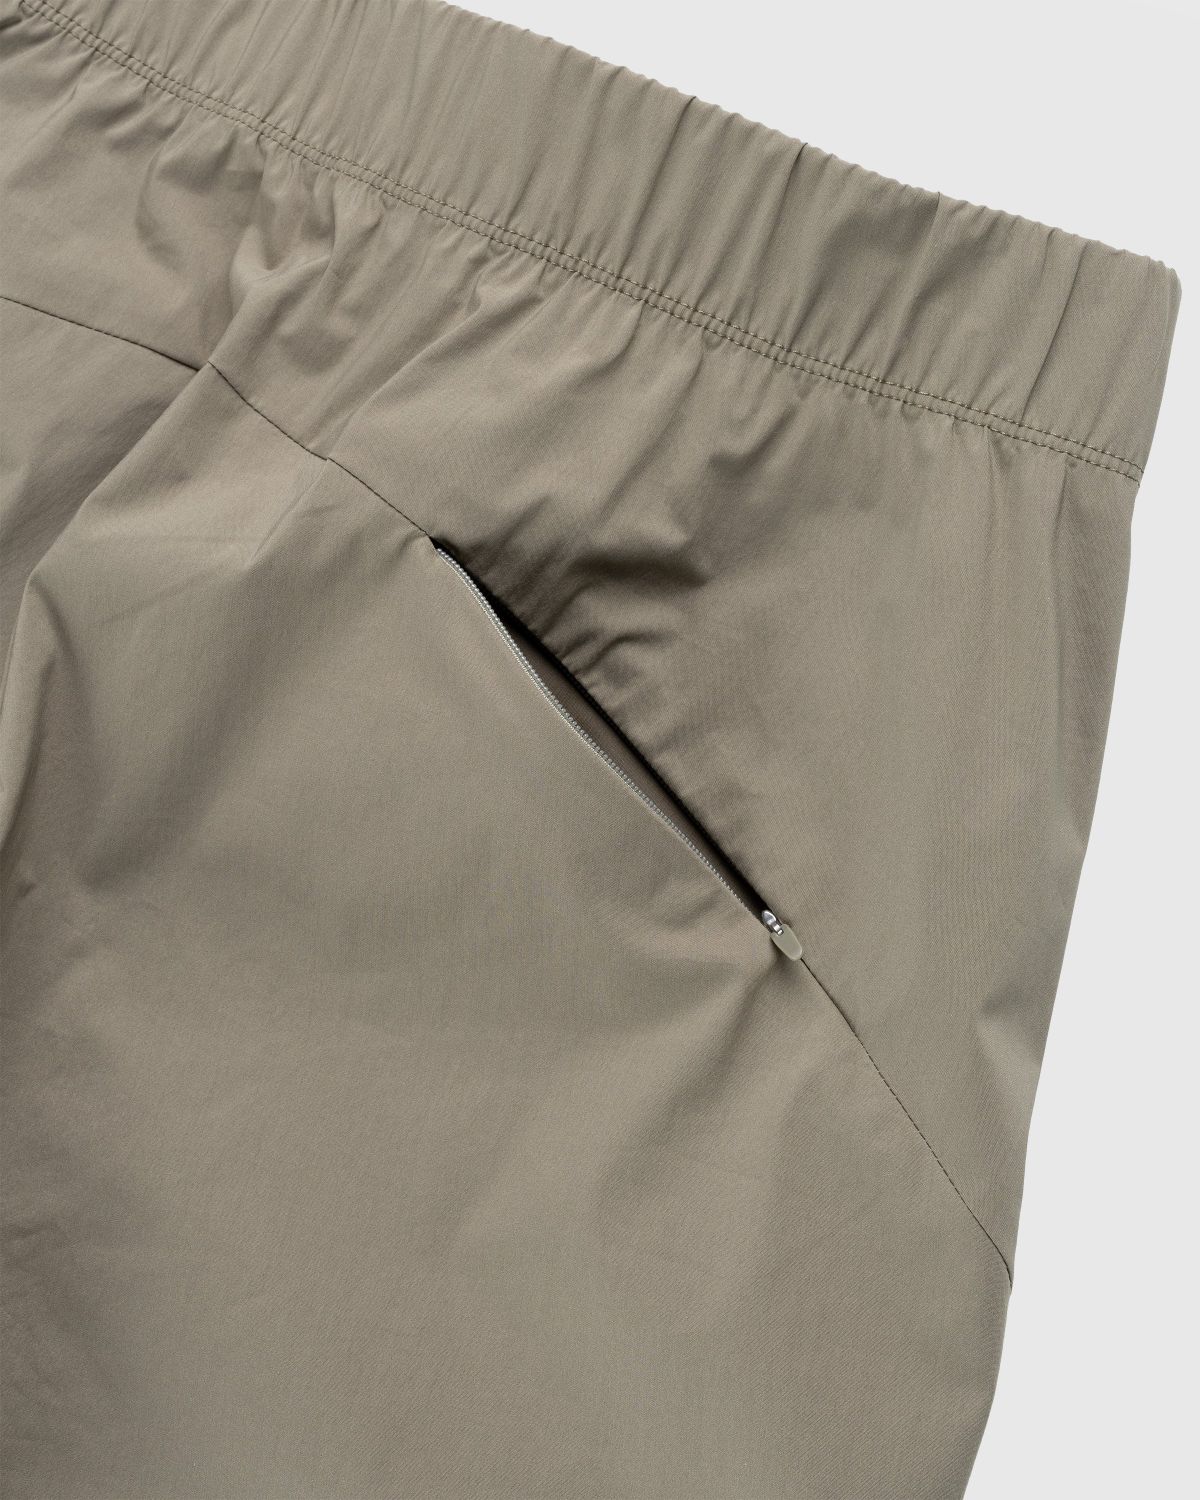 Post Archive Faction (PAF) – 5.0+ Technical Pants Right Green